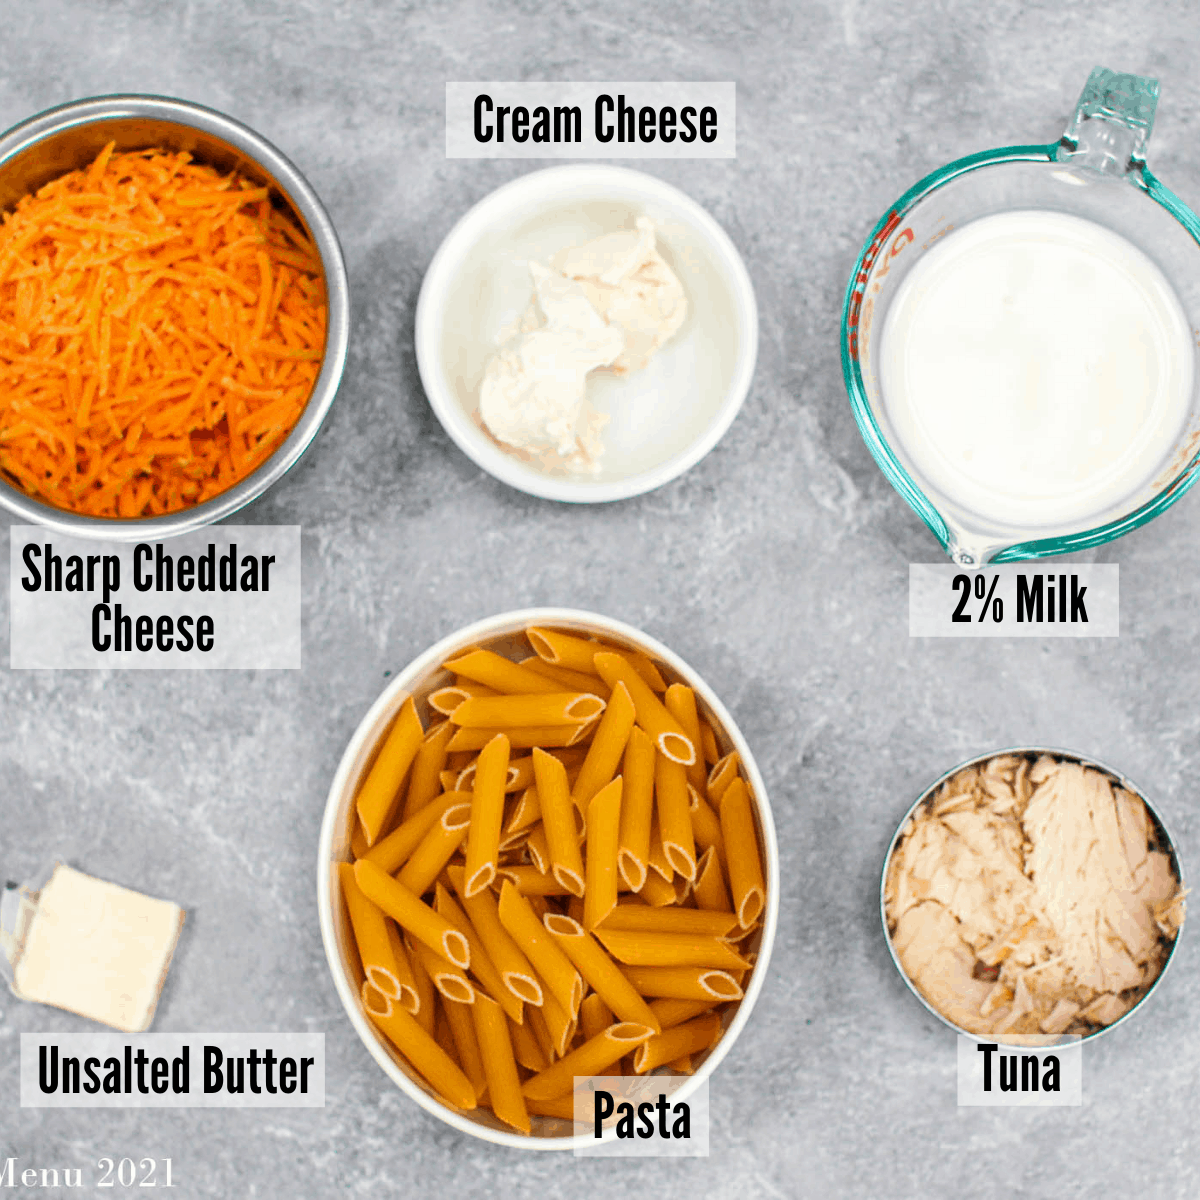 All of the ingredients for tuna mac and cheese: sharp cheddar cheese, cream cheese, 2% milk, tuna, pasta, and unsalted butter